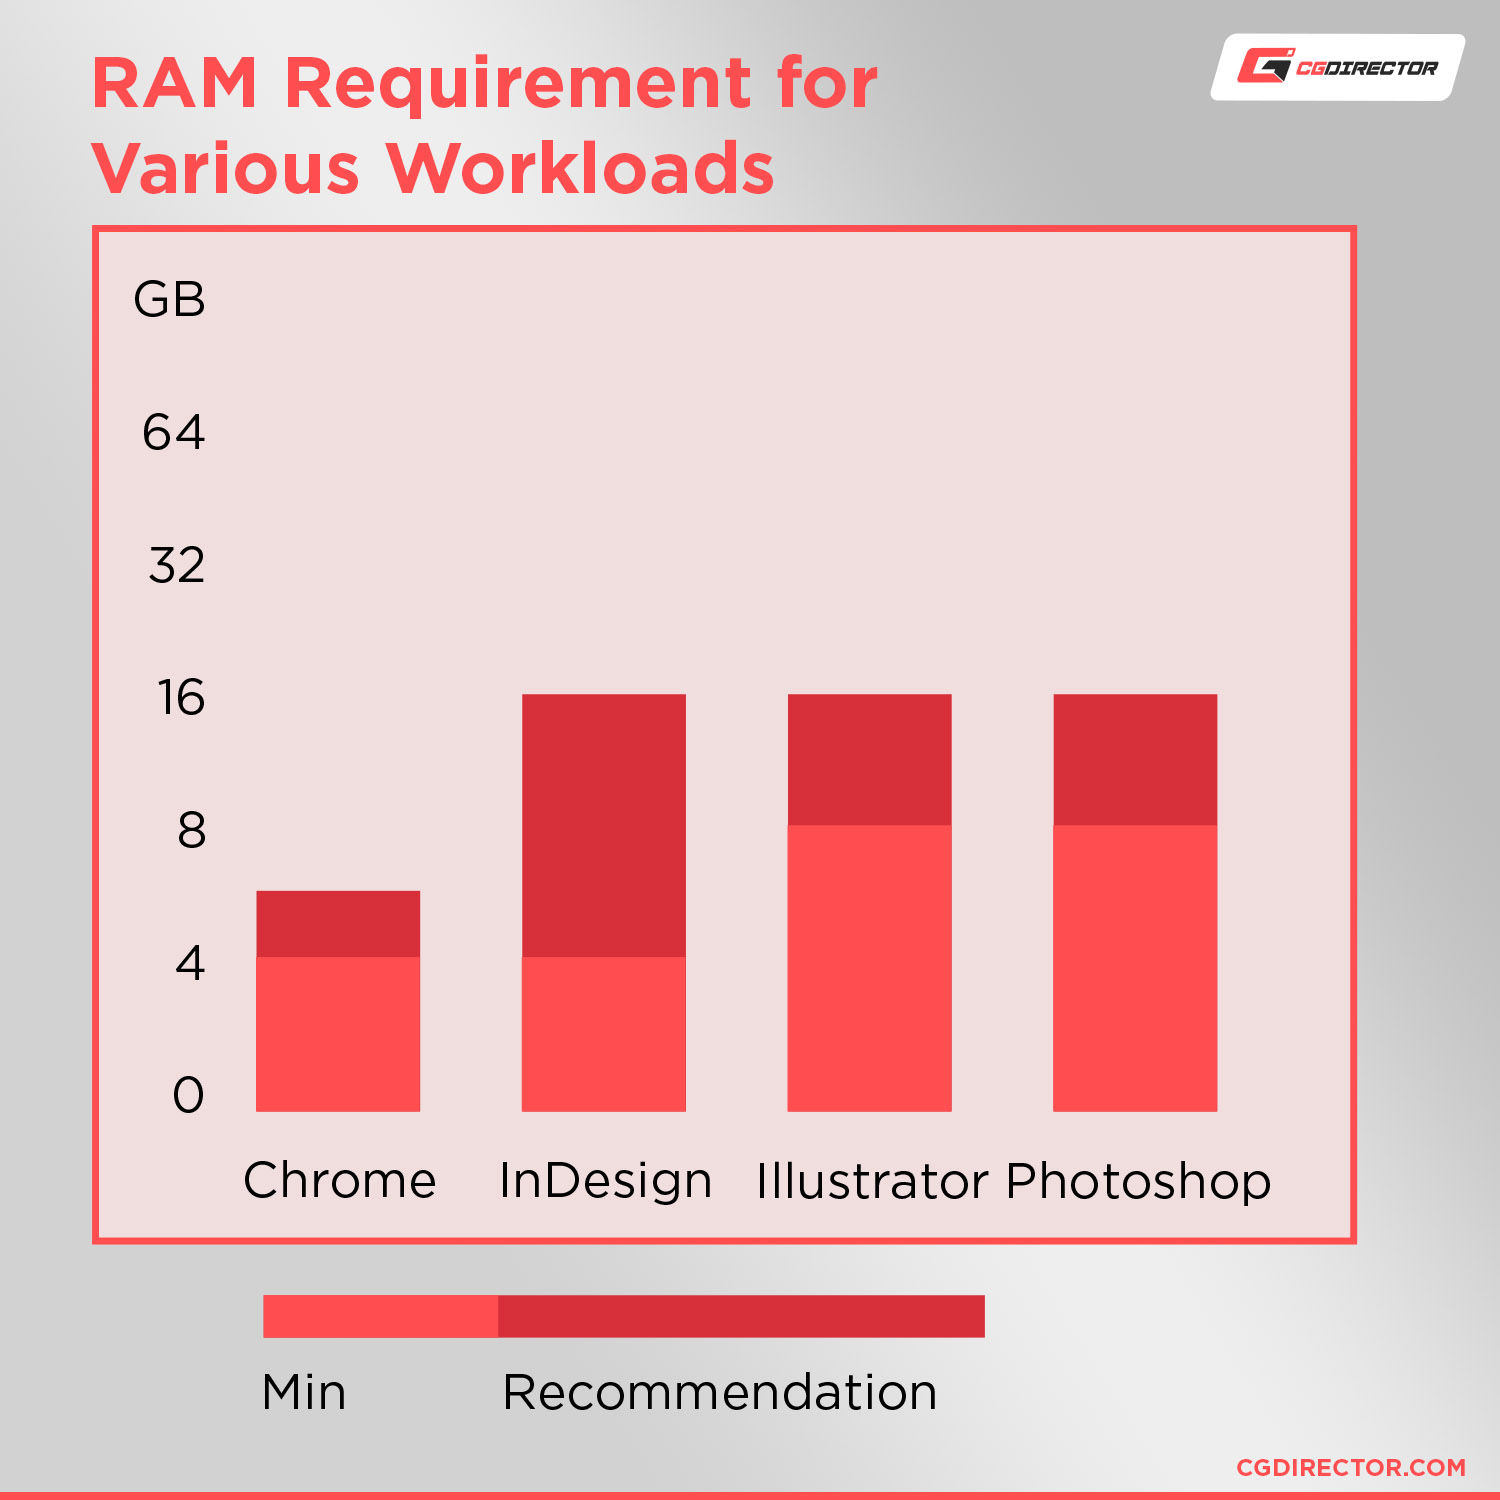 RAM requirement for various workloads